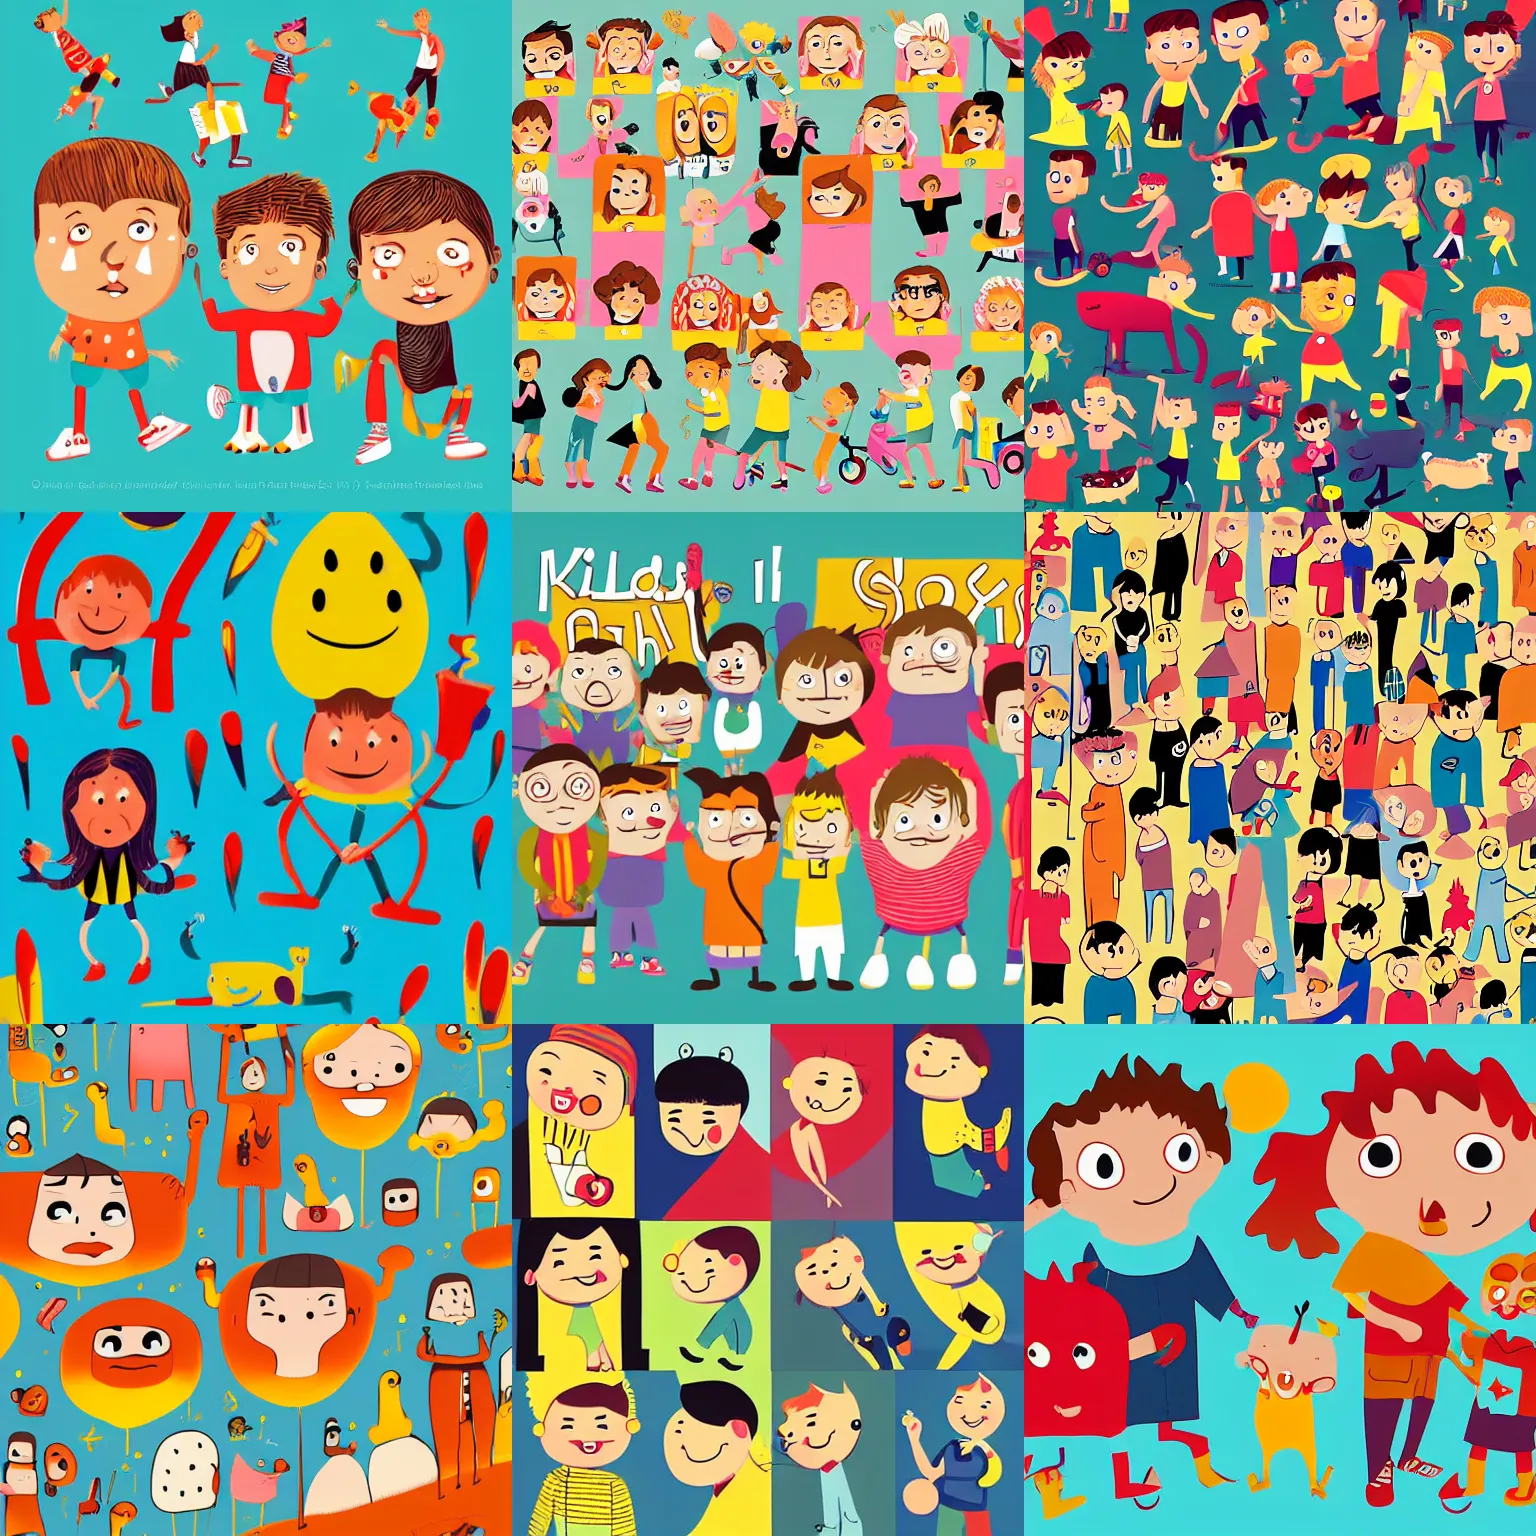 Prompt: kids in cartoon style illustration by petra eriksson, paul thurlby and tom haugomat